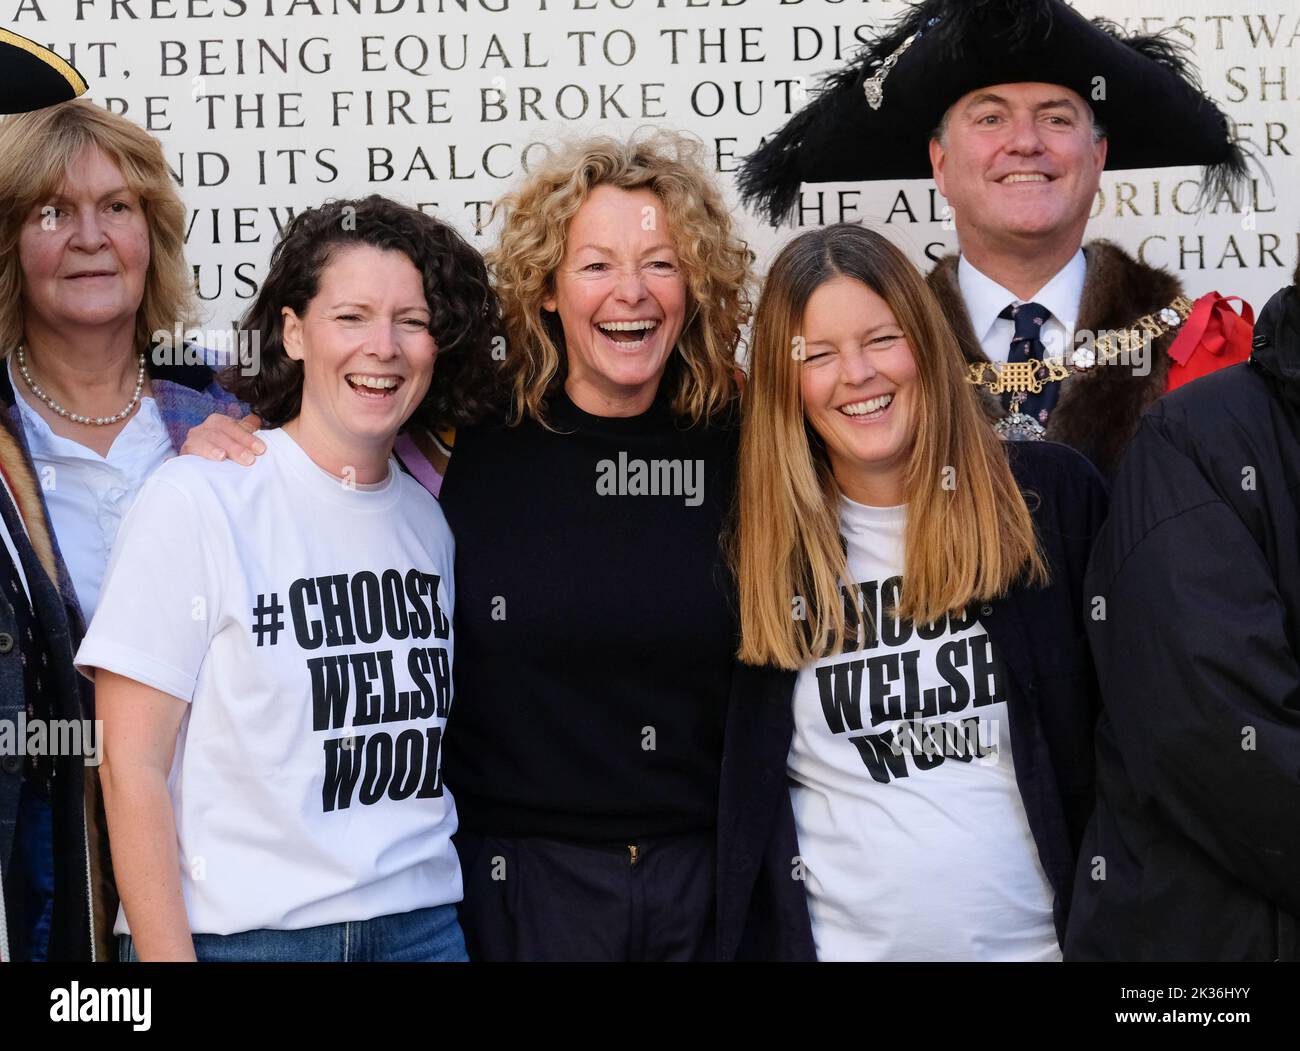 London Bridge, London, UK. 25th Sept 2022. The annual London Sheep Drive across London Bridge by The Worshipful Company of Woolmen. Kate Humble [Centre] and the Lord Mayor of London Vincent Keaveny [Right].   Credit: Matthew Chattle/Alamy Live News Stock Photo